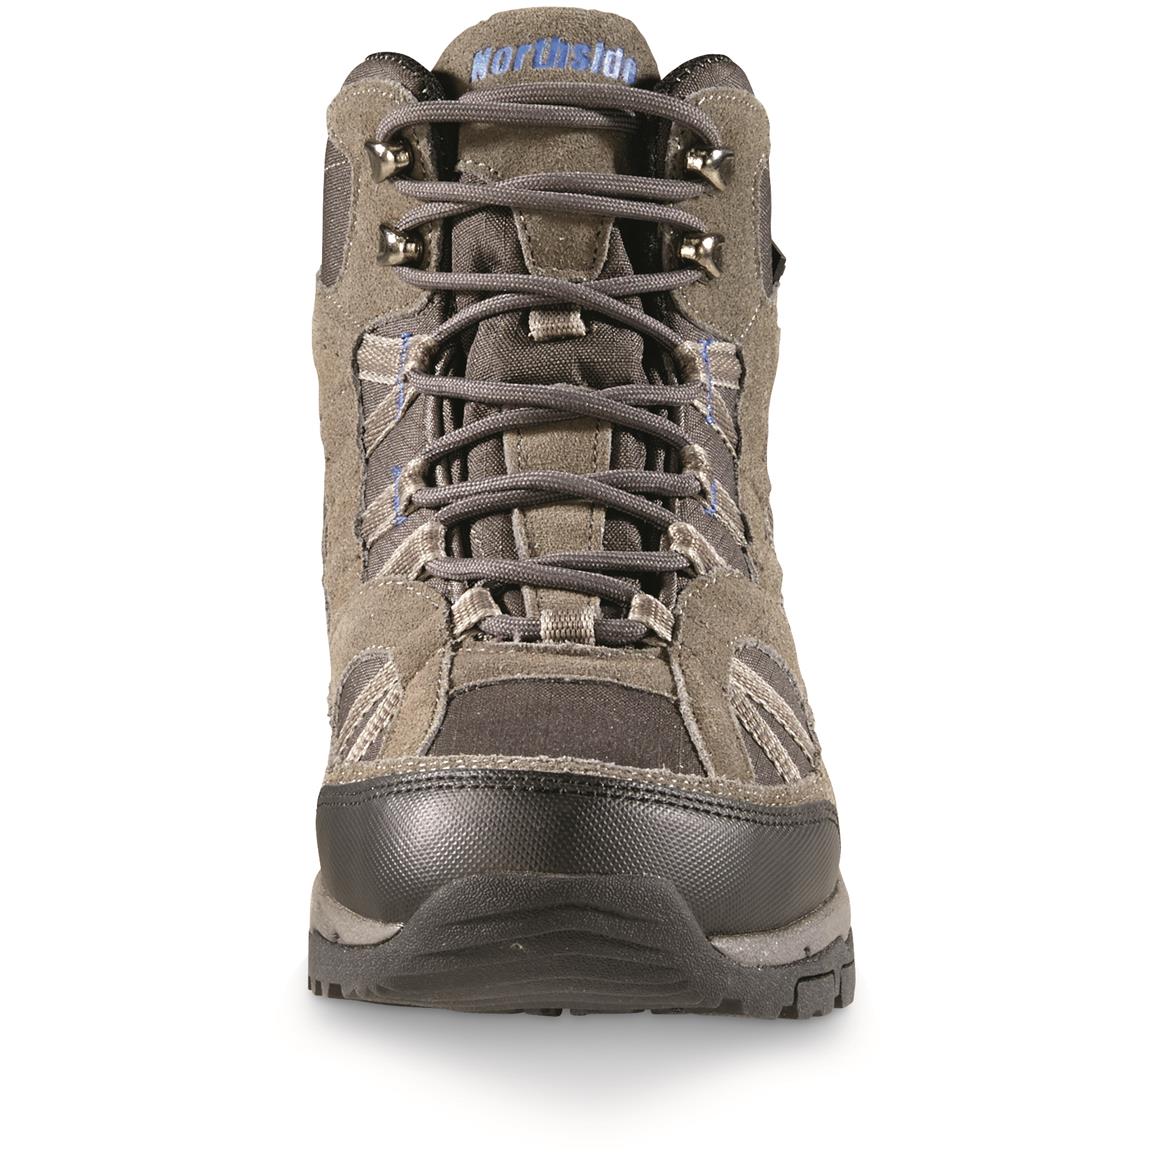 northside rampart hiking boots